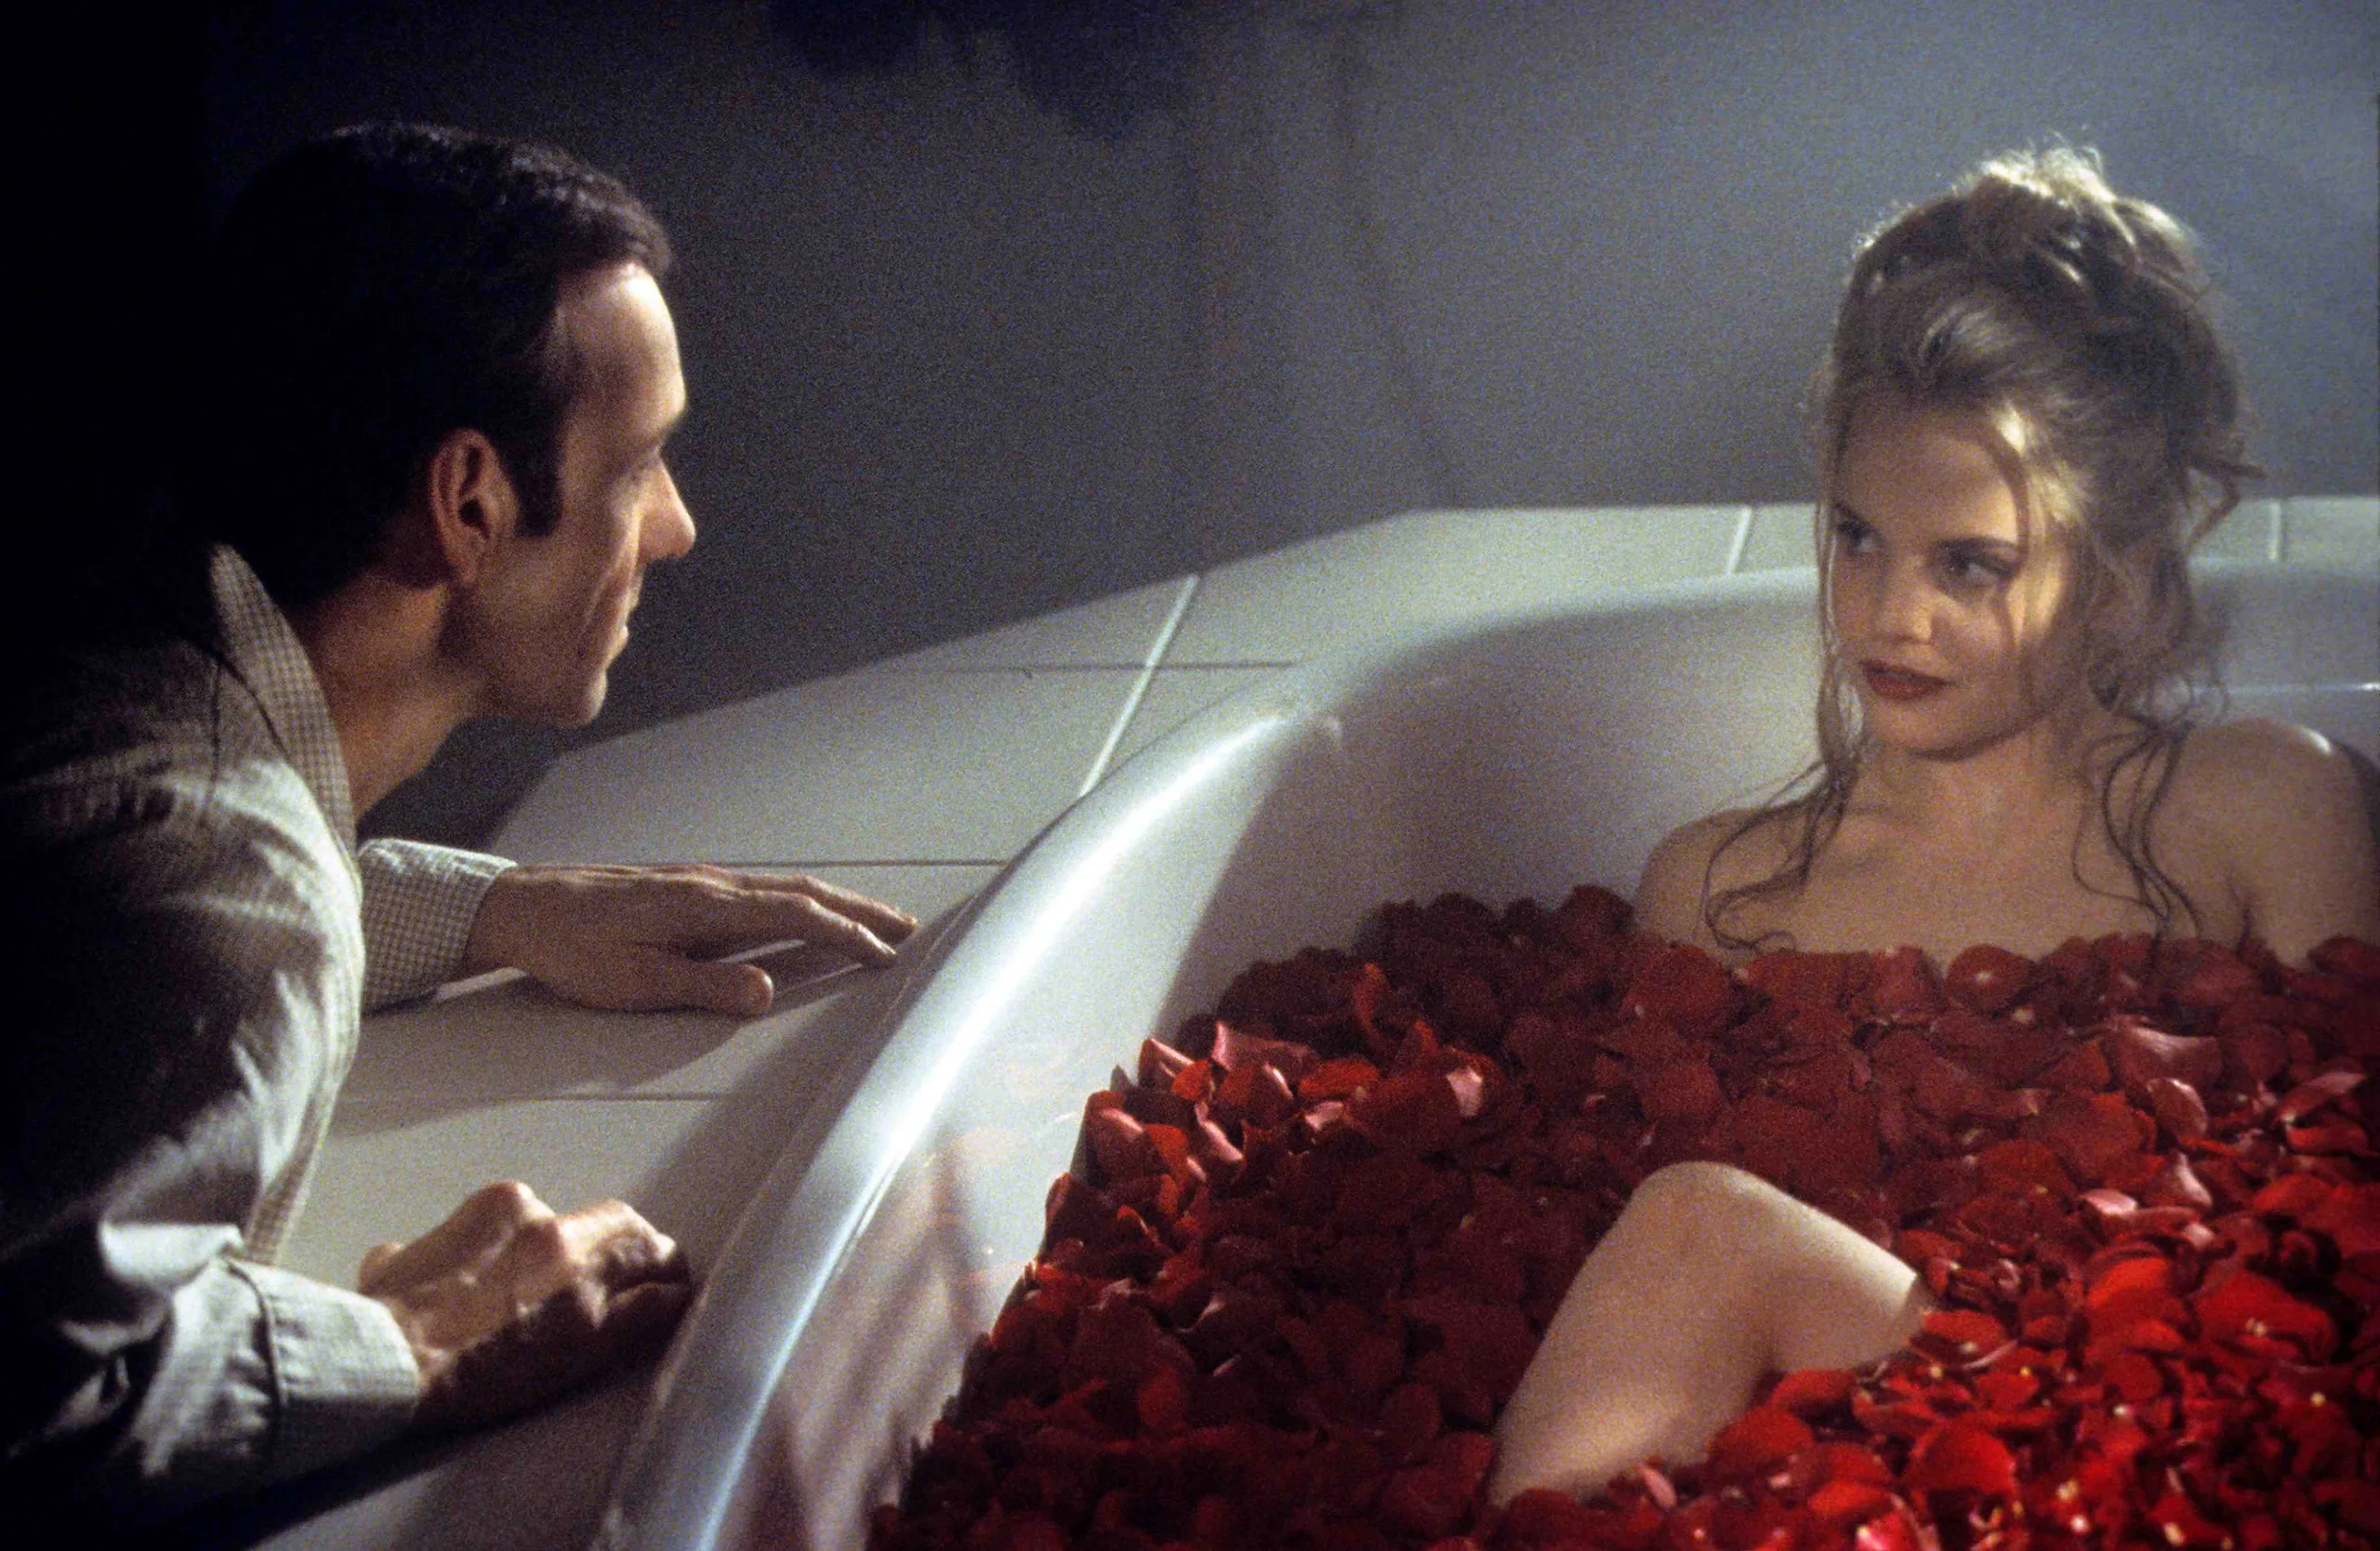 movie review american beauty